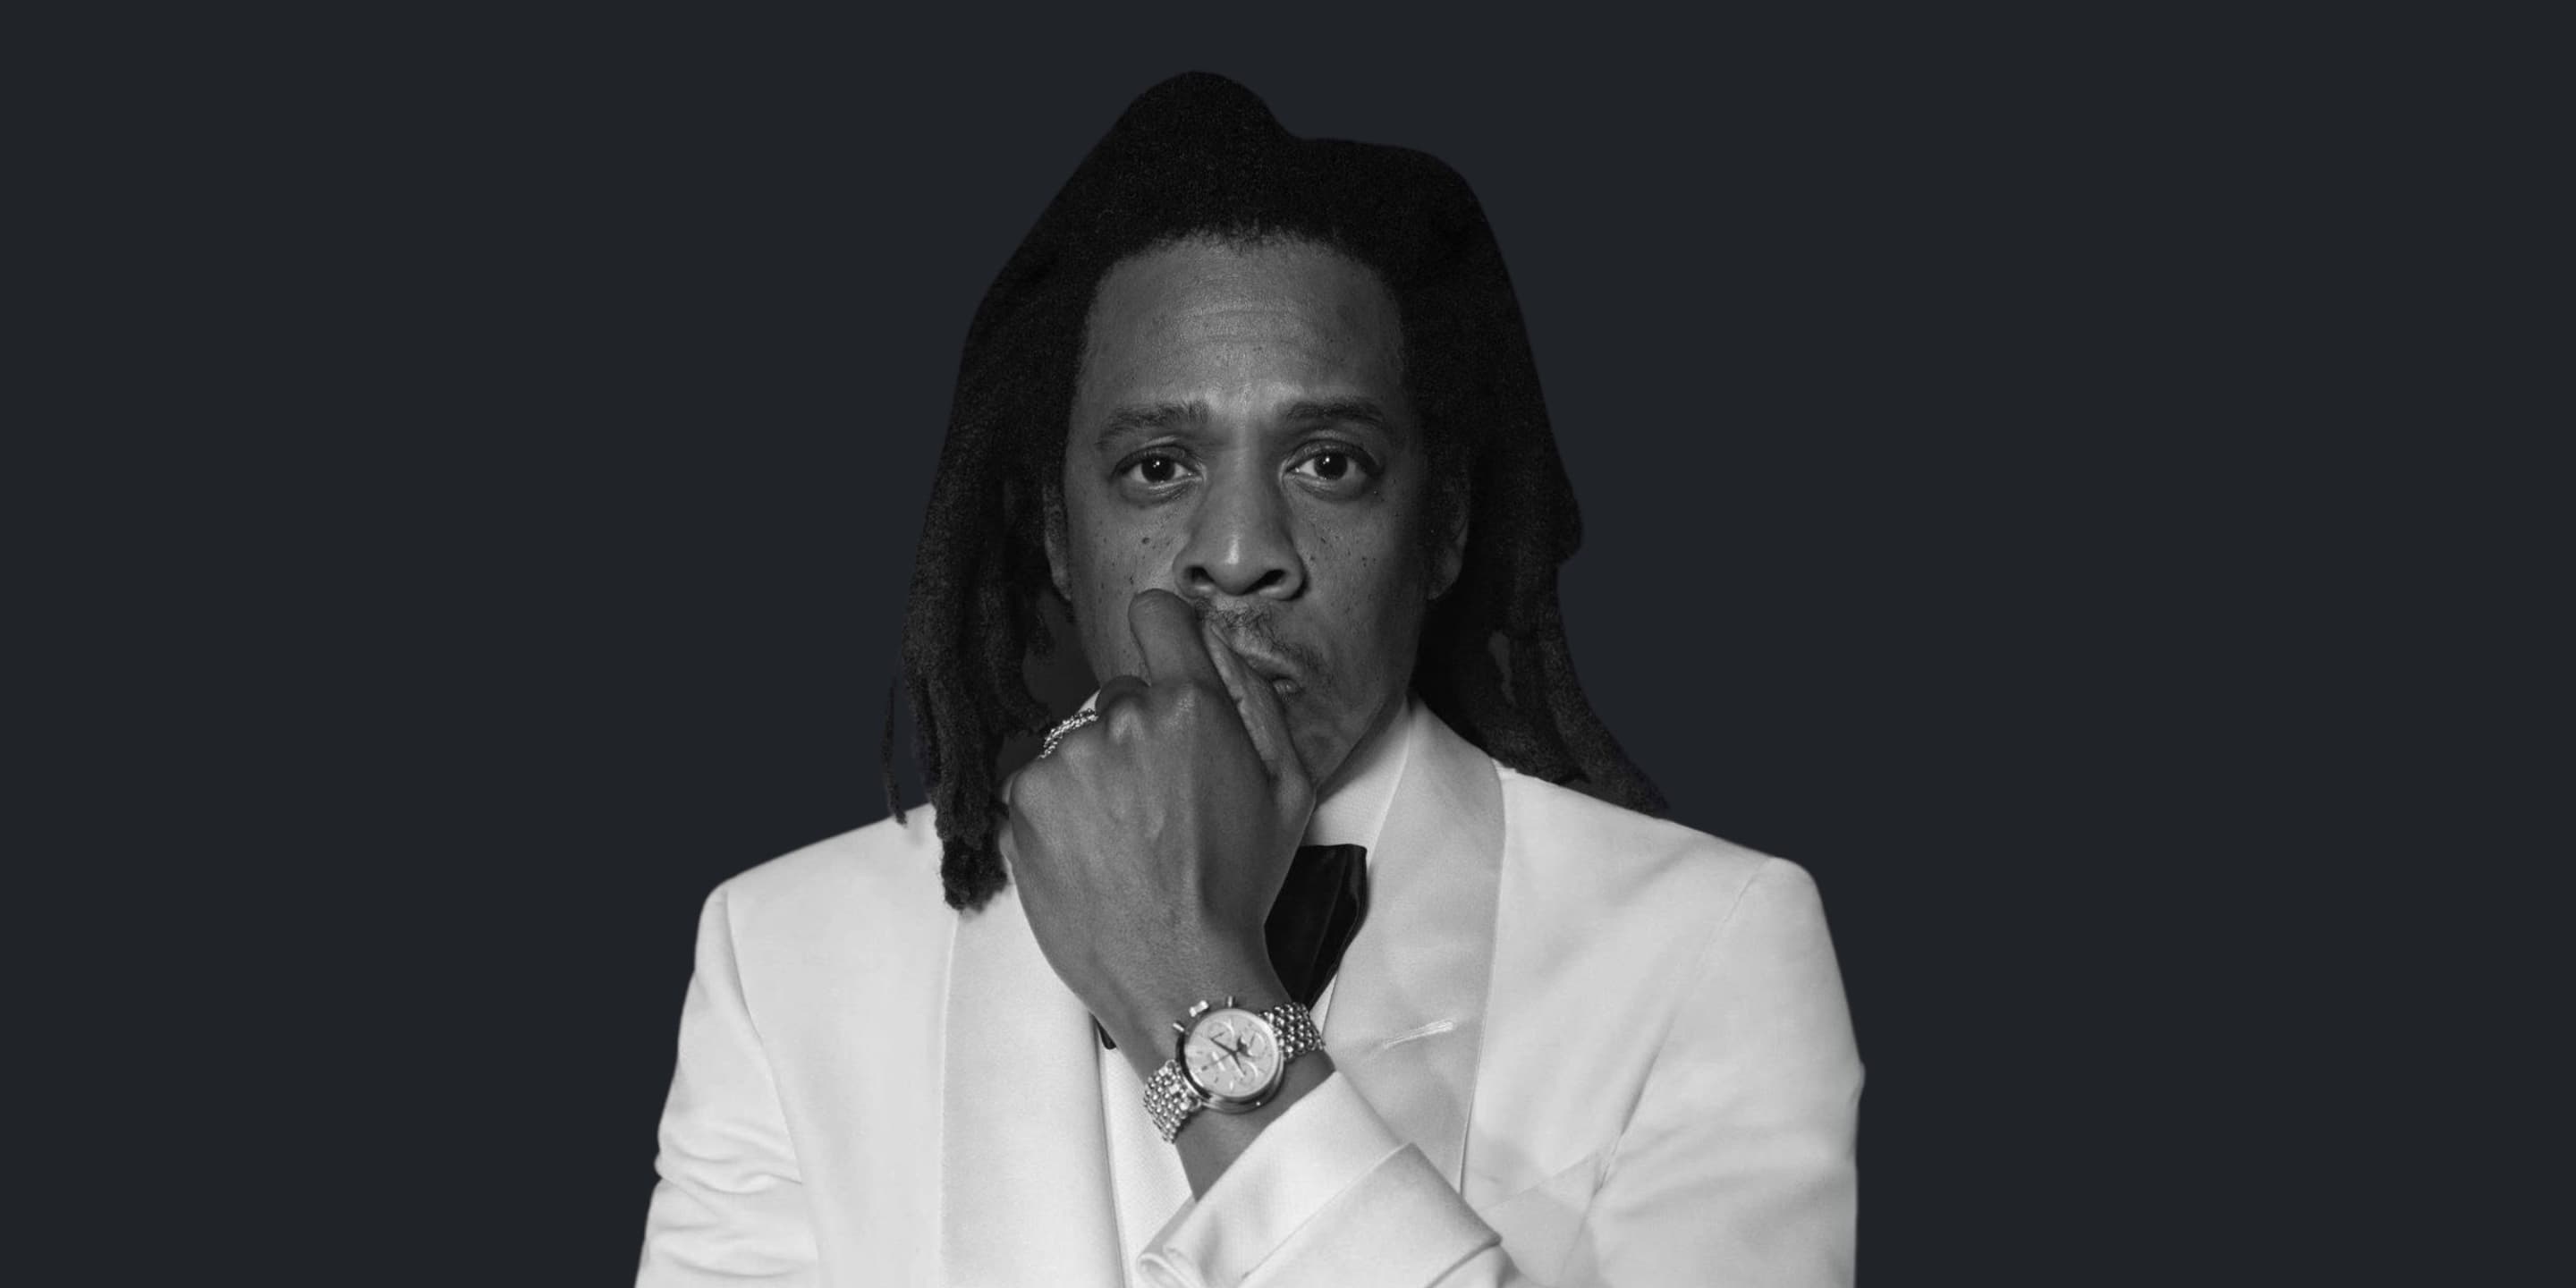 WRISTCHECK WELCOMES JAY-Z ON BOARD AS AN INVESTOR